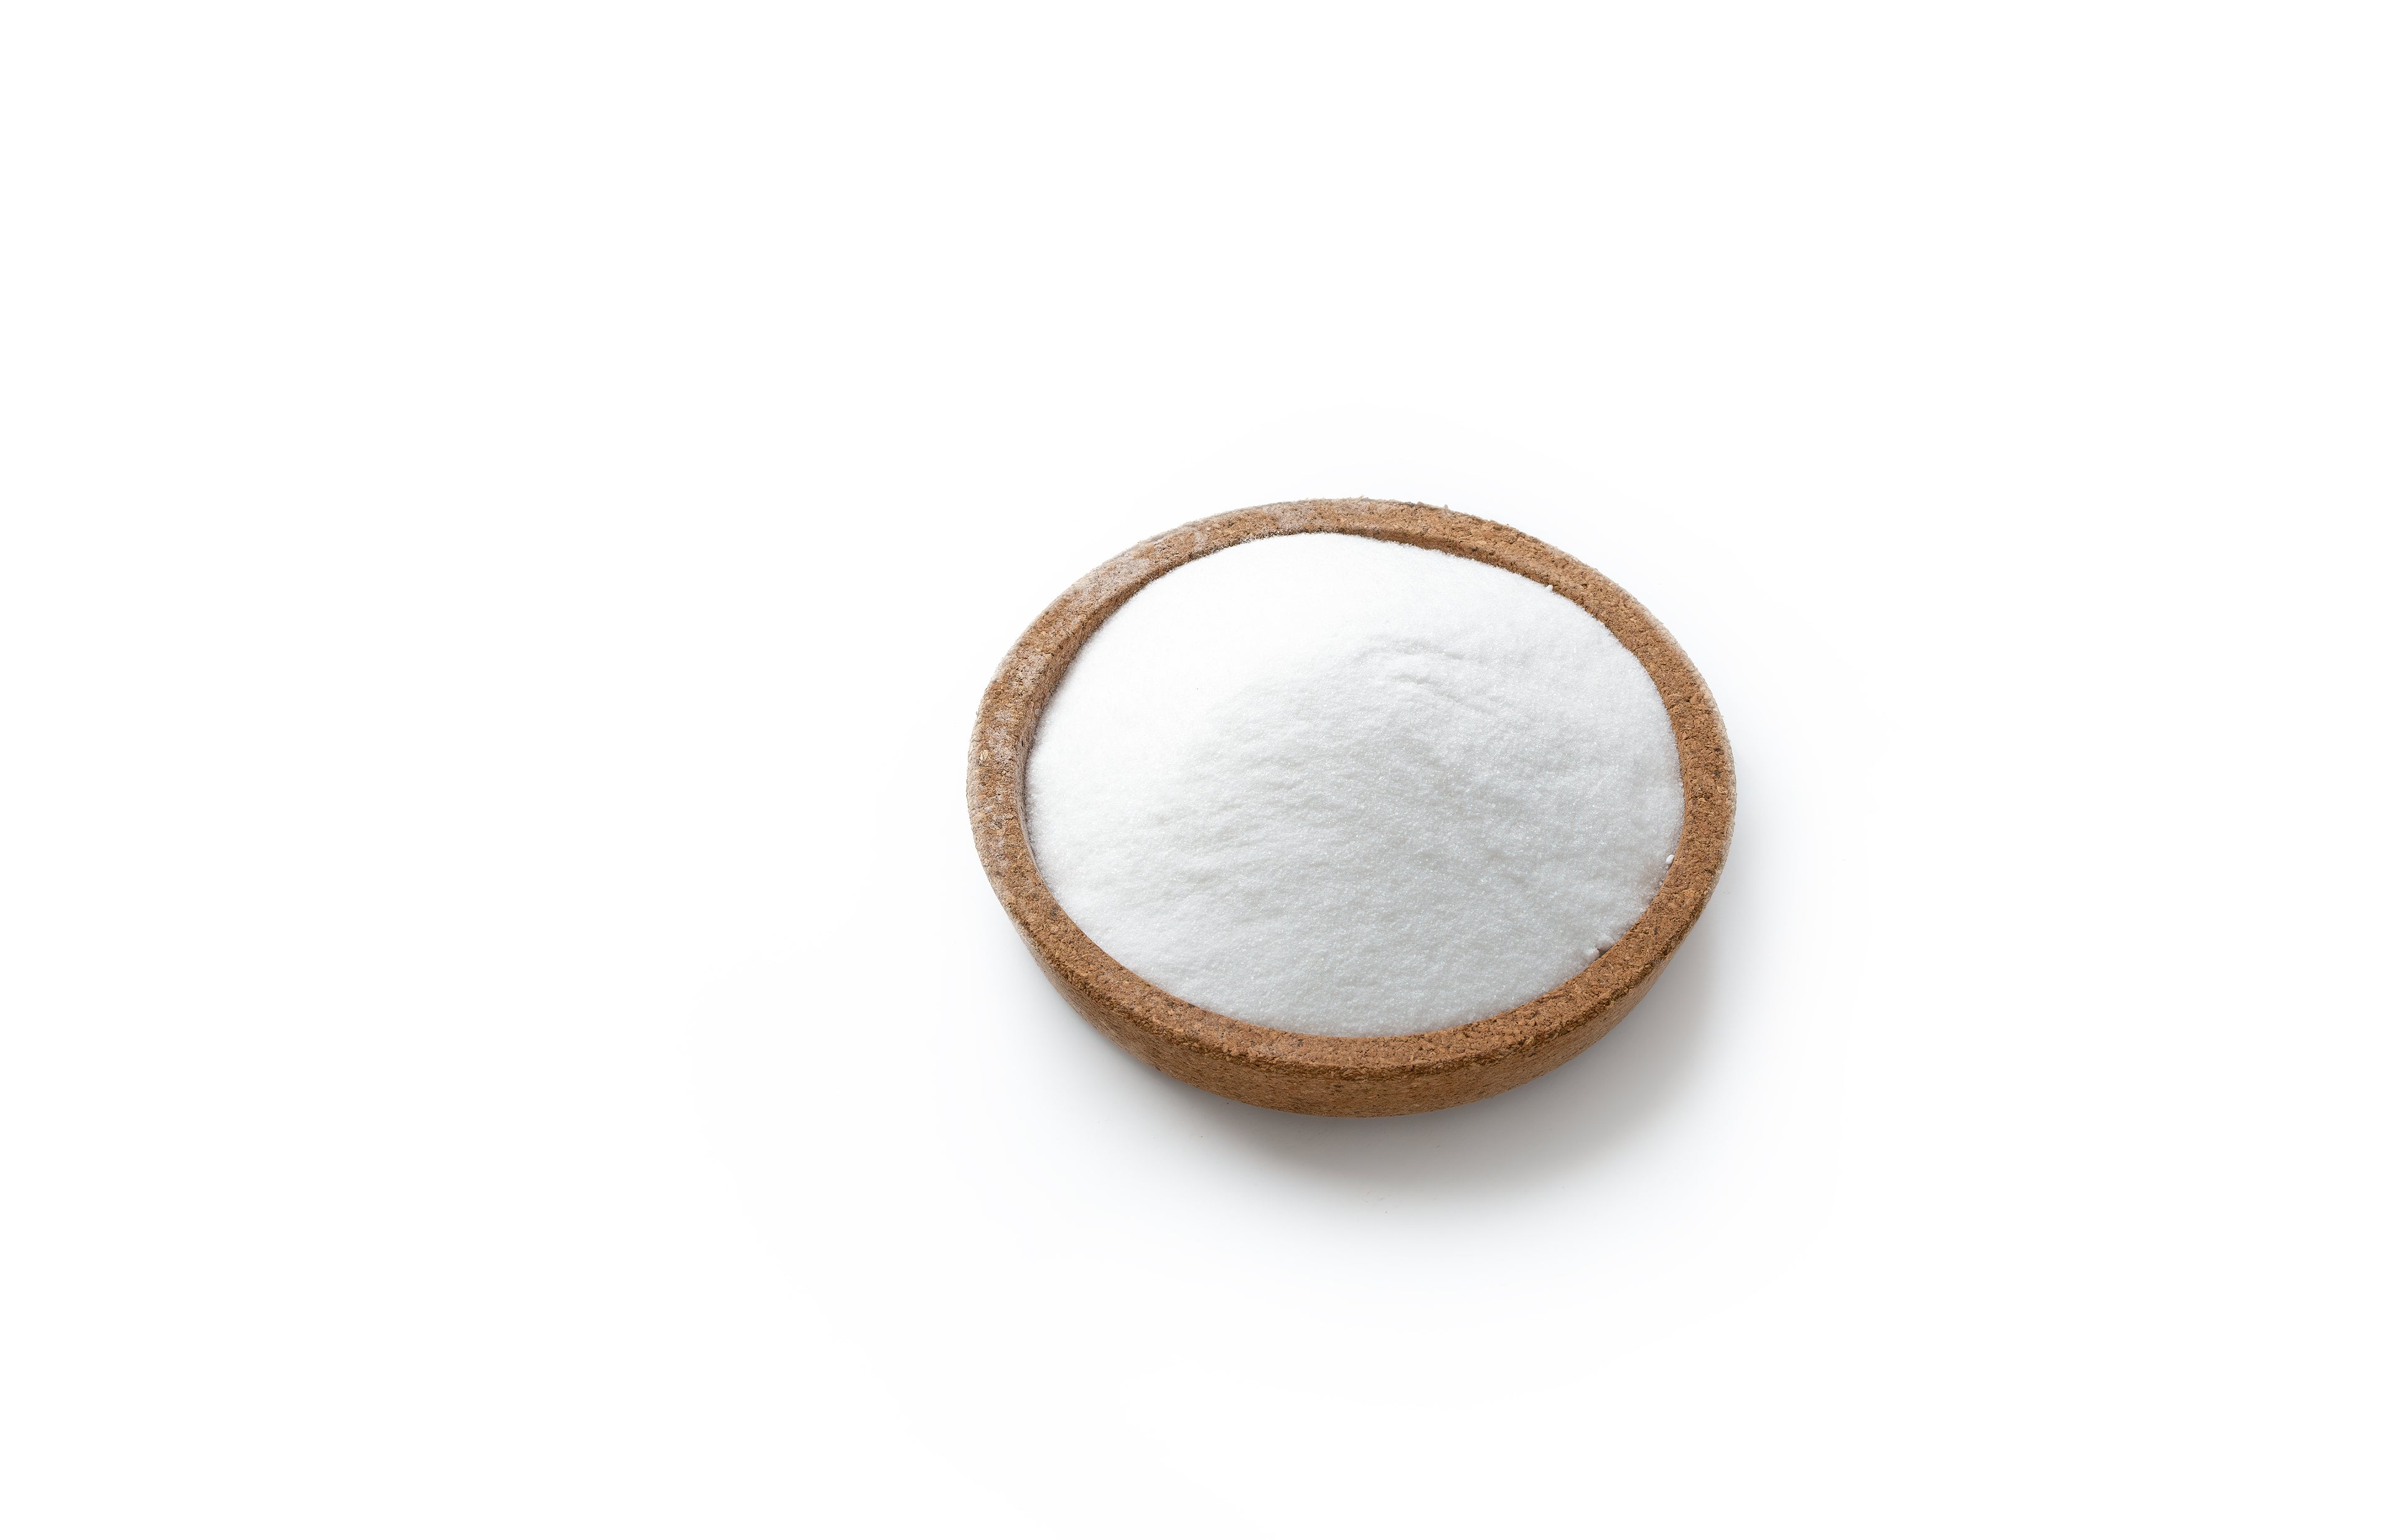 Xylitol is a sugar alcohol that has been used for many decades in countries like Japan. It is a naturally occuring product derived by breaking down glucose with enzymes.